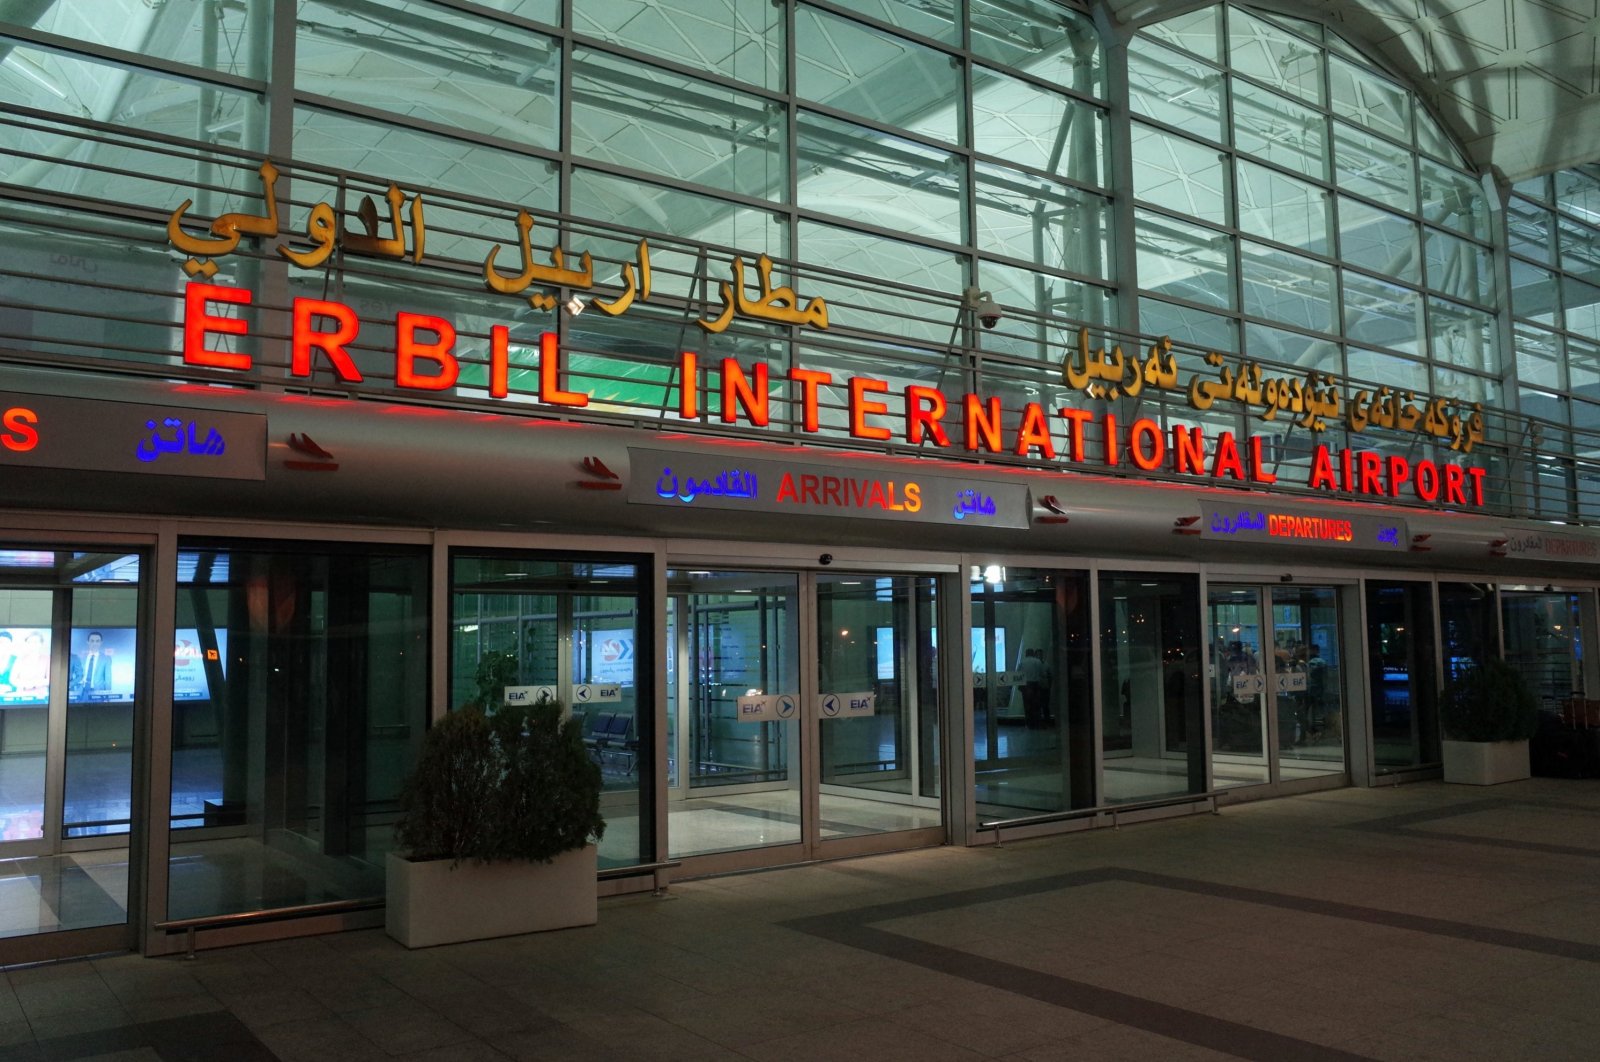 The entrance of Irbil Airport is seen in this file photo taken in Iraq on Sept. 25, 2017. (Reuters File Photo)